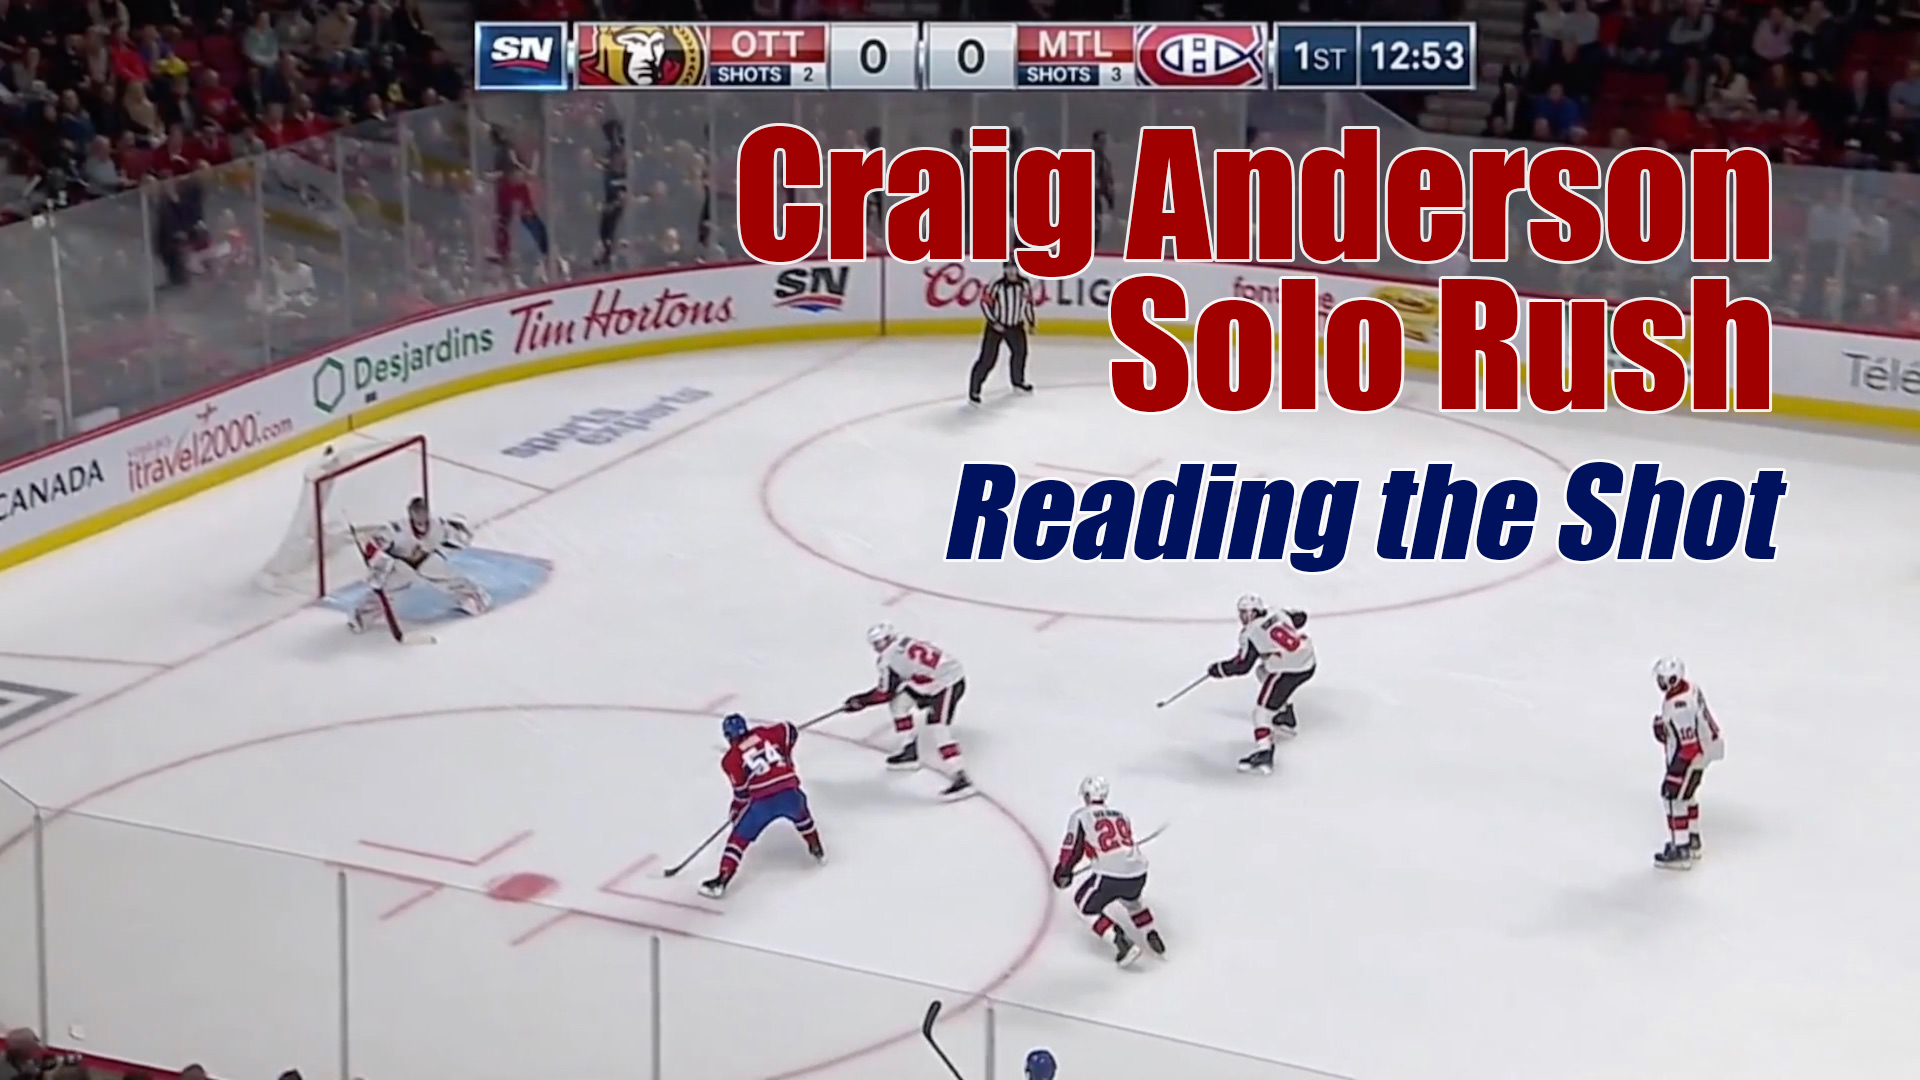 Pro-Reads: Craig Anderson – reading the shooter